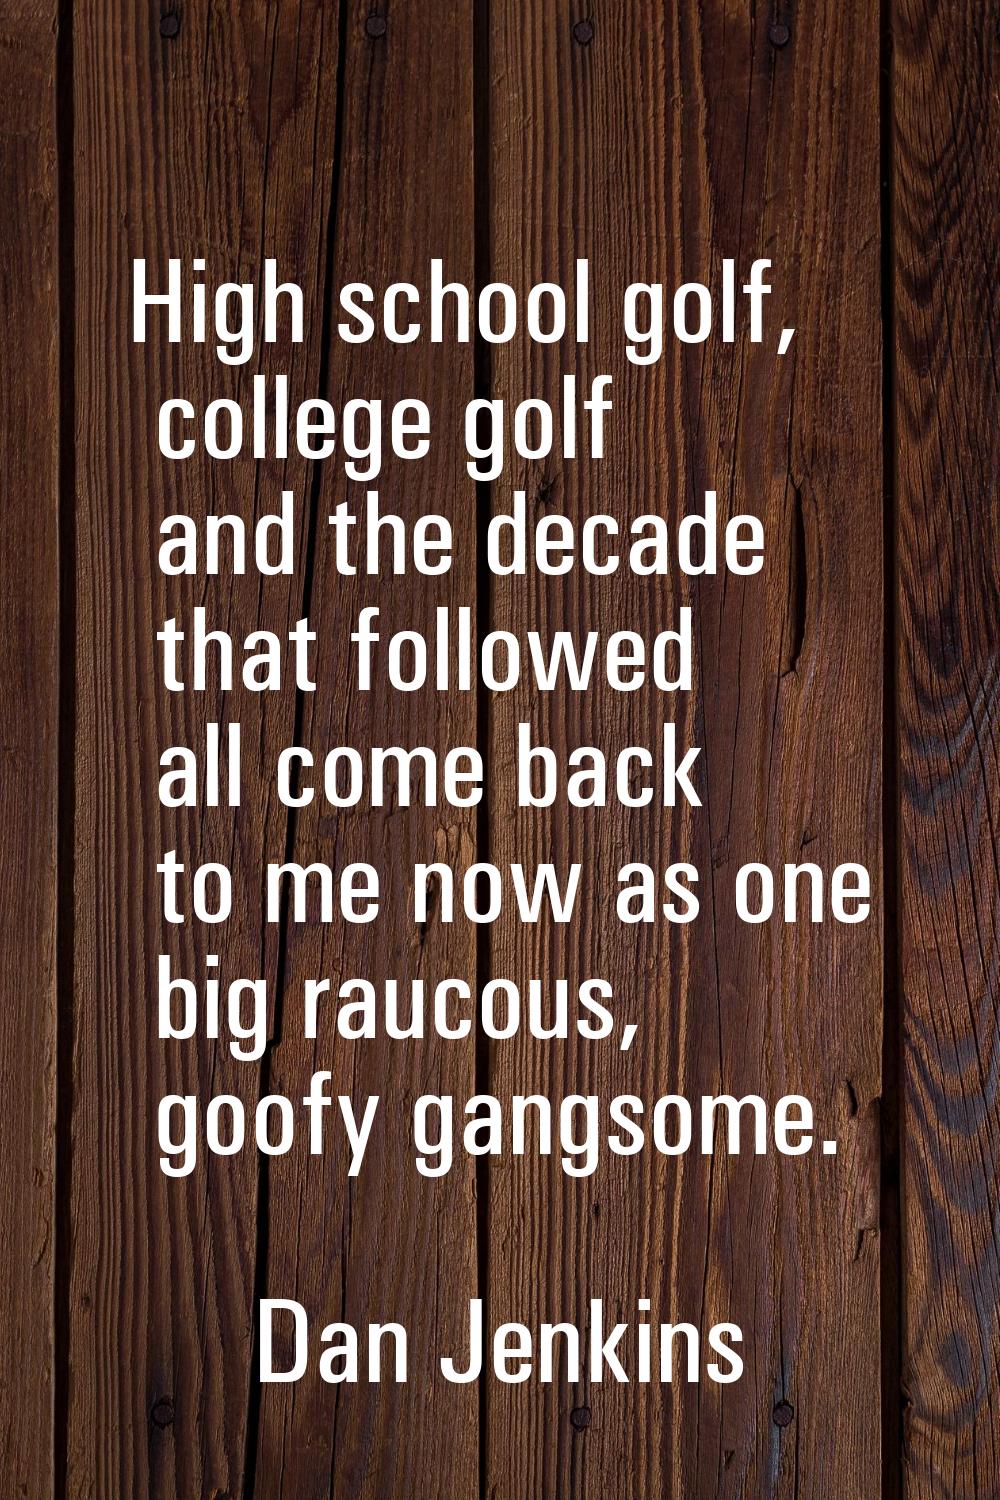 High school golf, college golf and the decade that followed all come back to me now as one big rauc